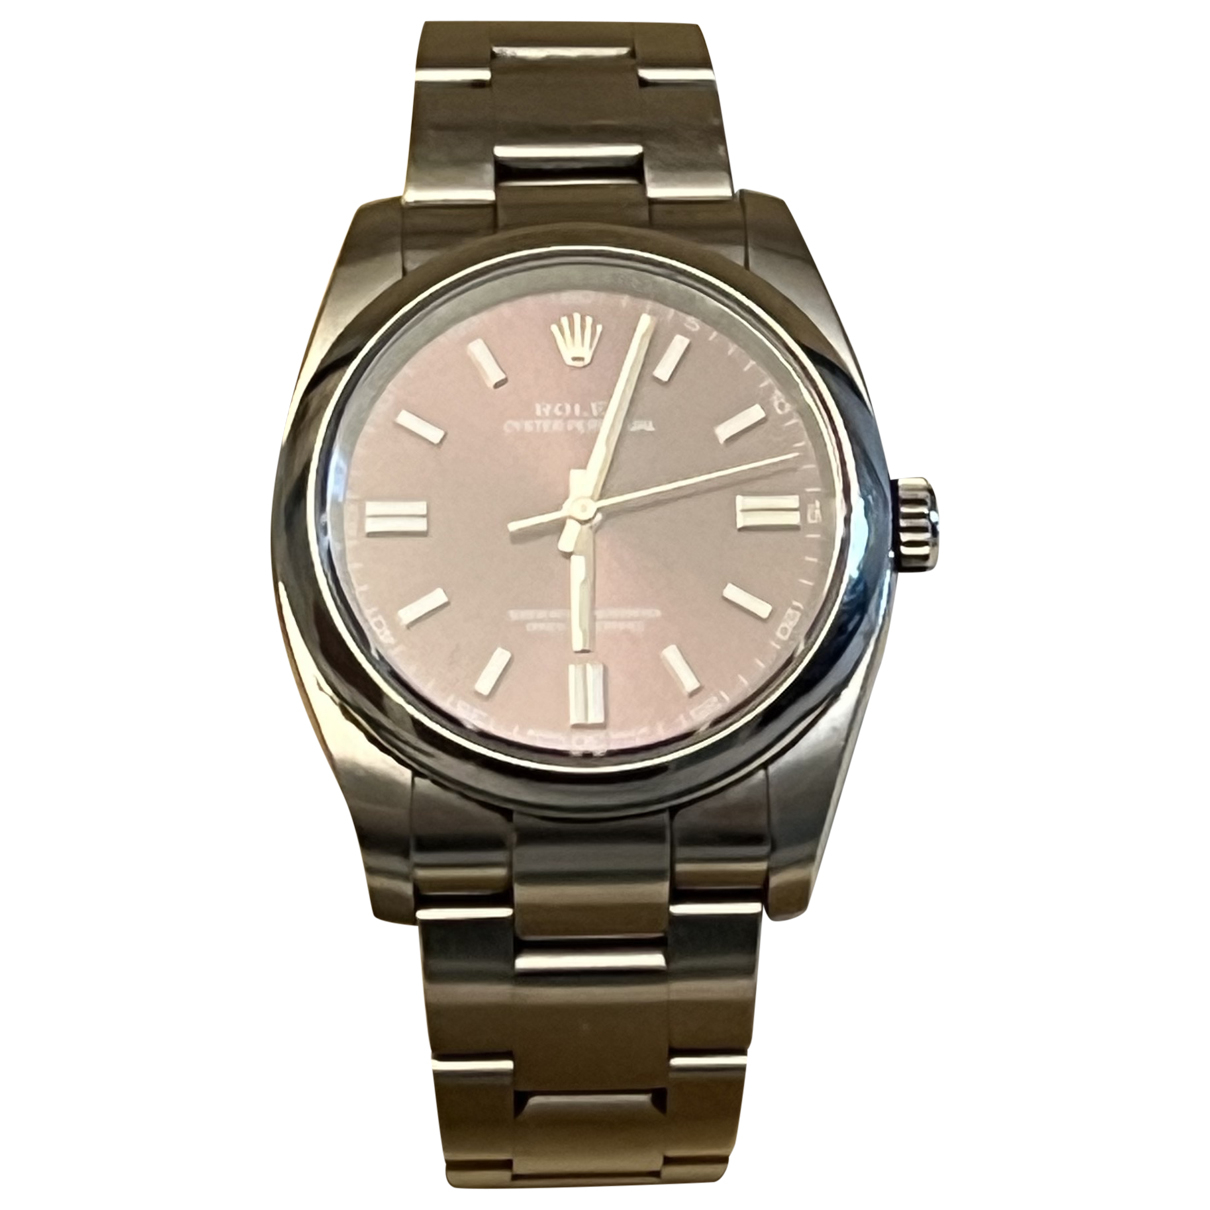 image of Rolex Oyster Perpetual 36mm watch